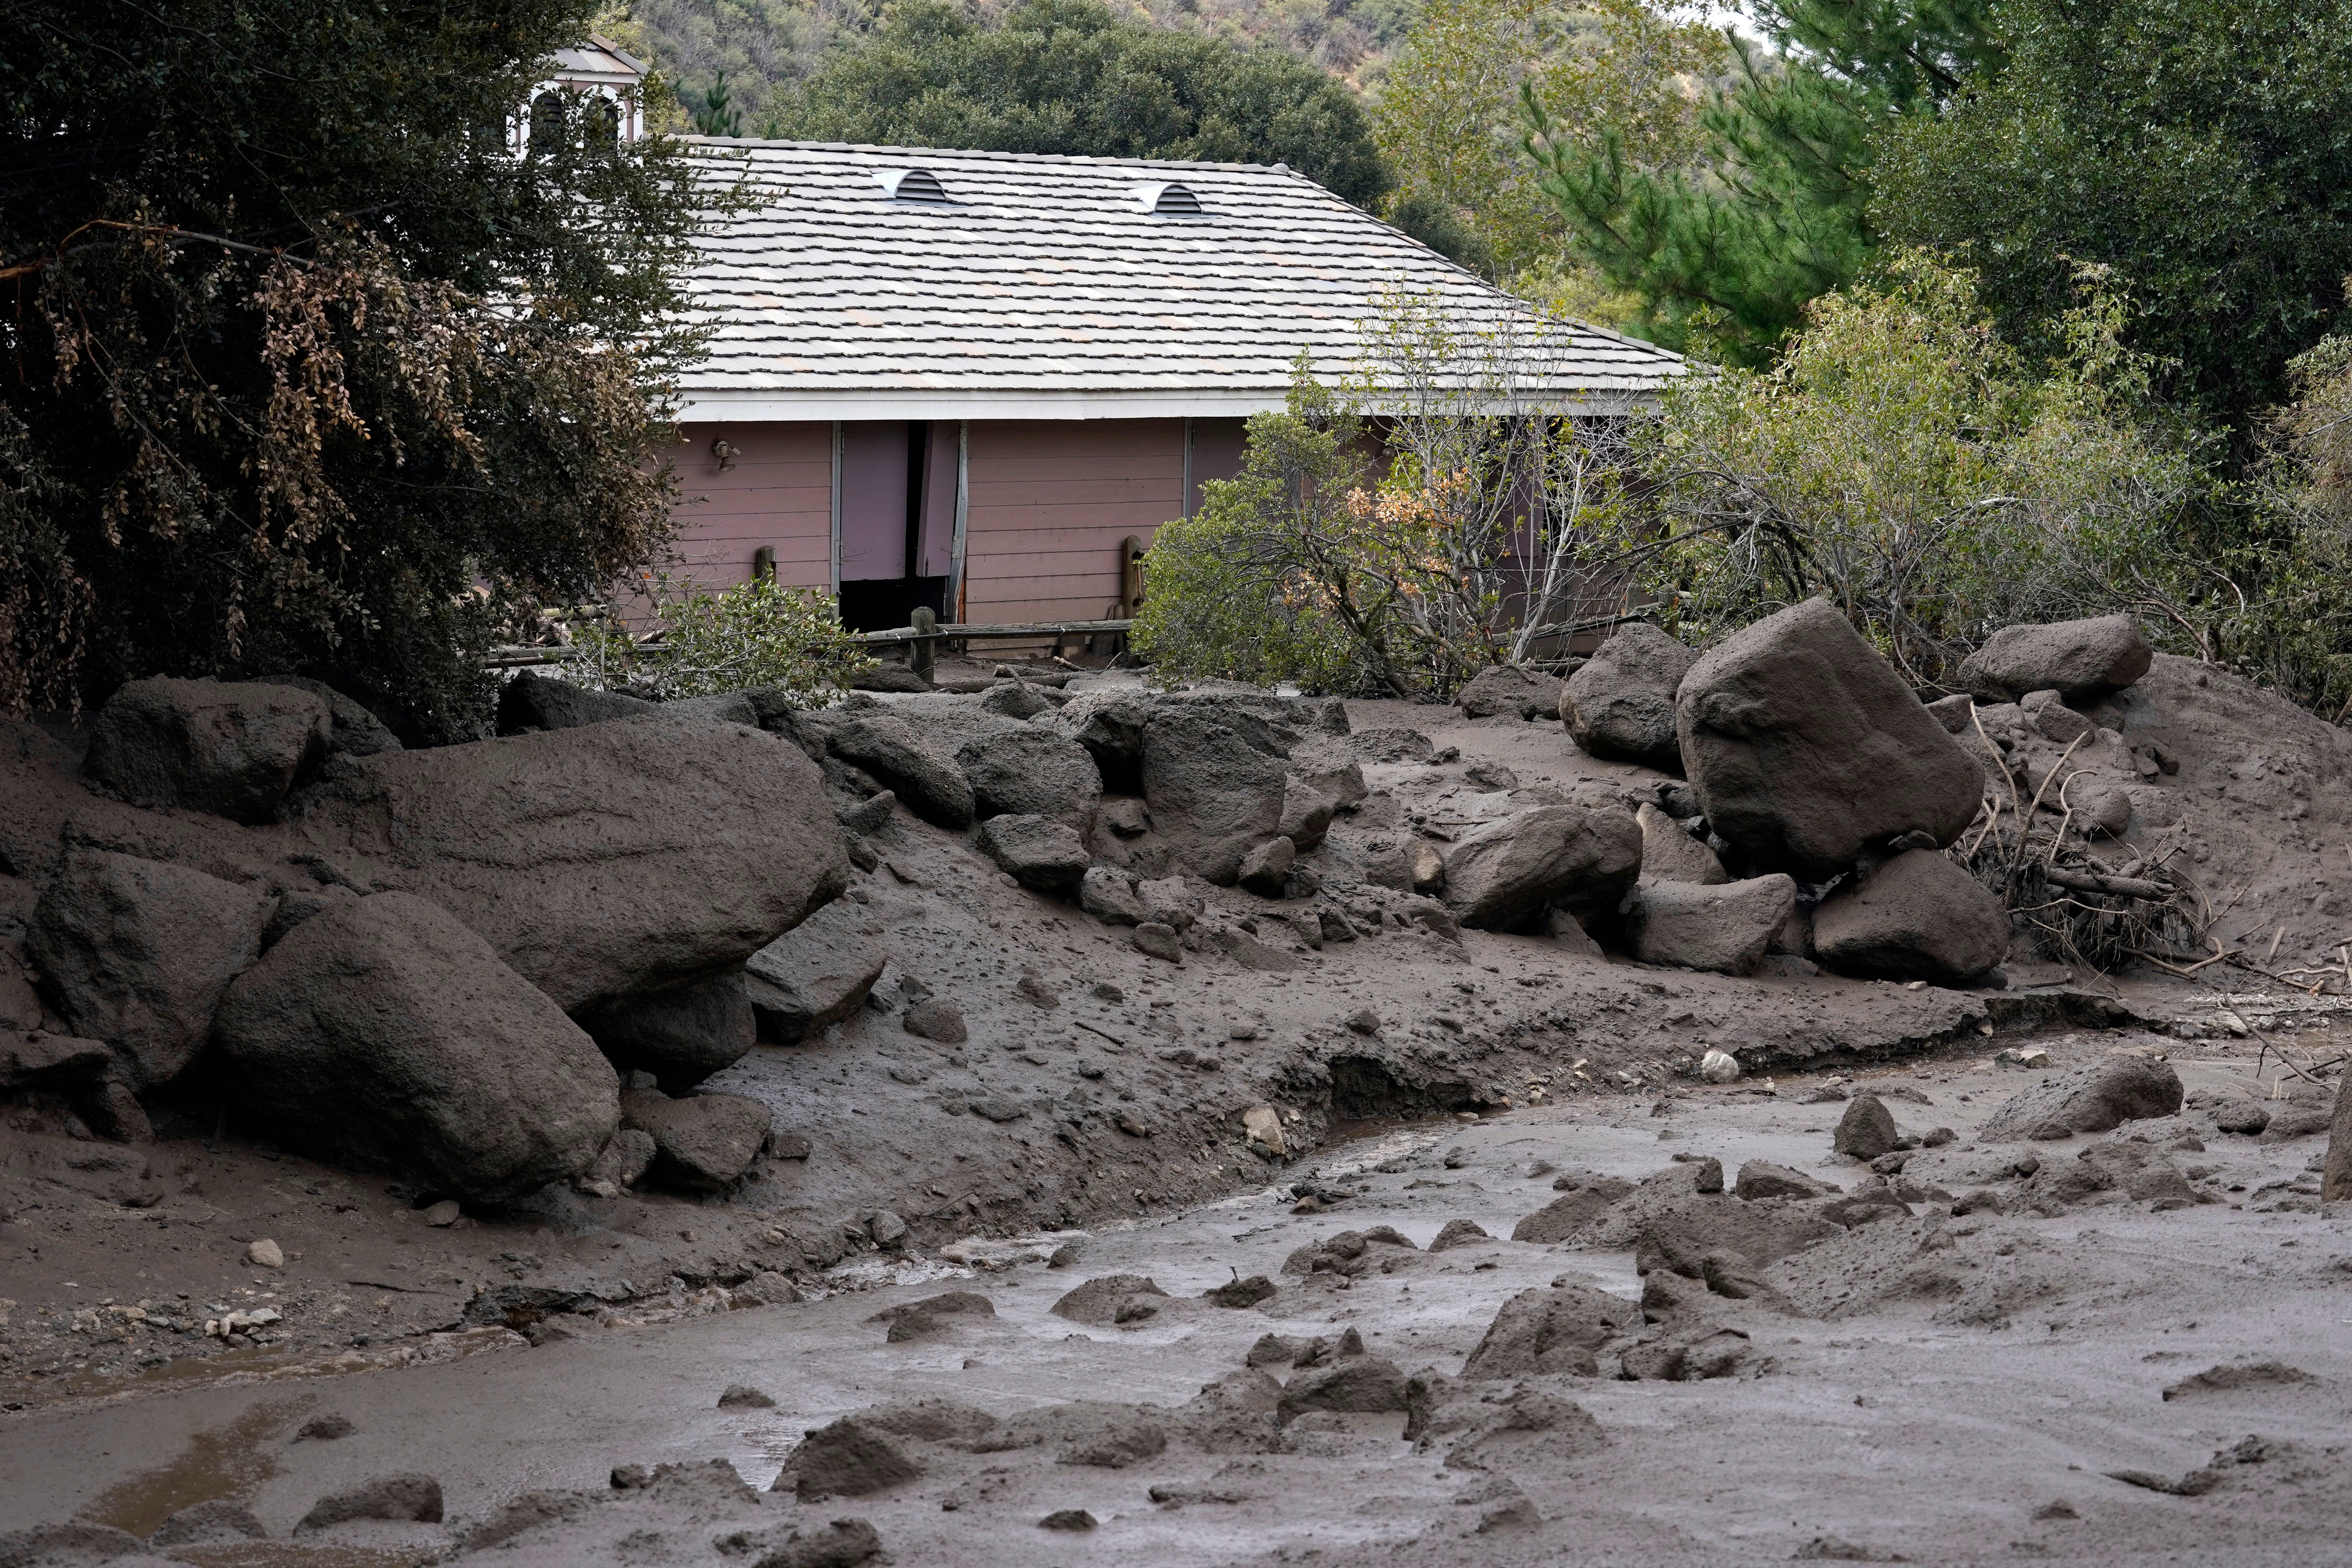 The front yard of a property is covered in mud in the aftermath of a mudslide Tuesday, Sept. 13, 2022, in Oak Glen, California. (Photo: Marcio Jose Sanchez, AP)